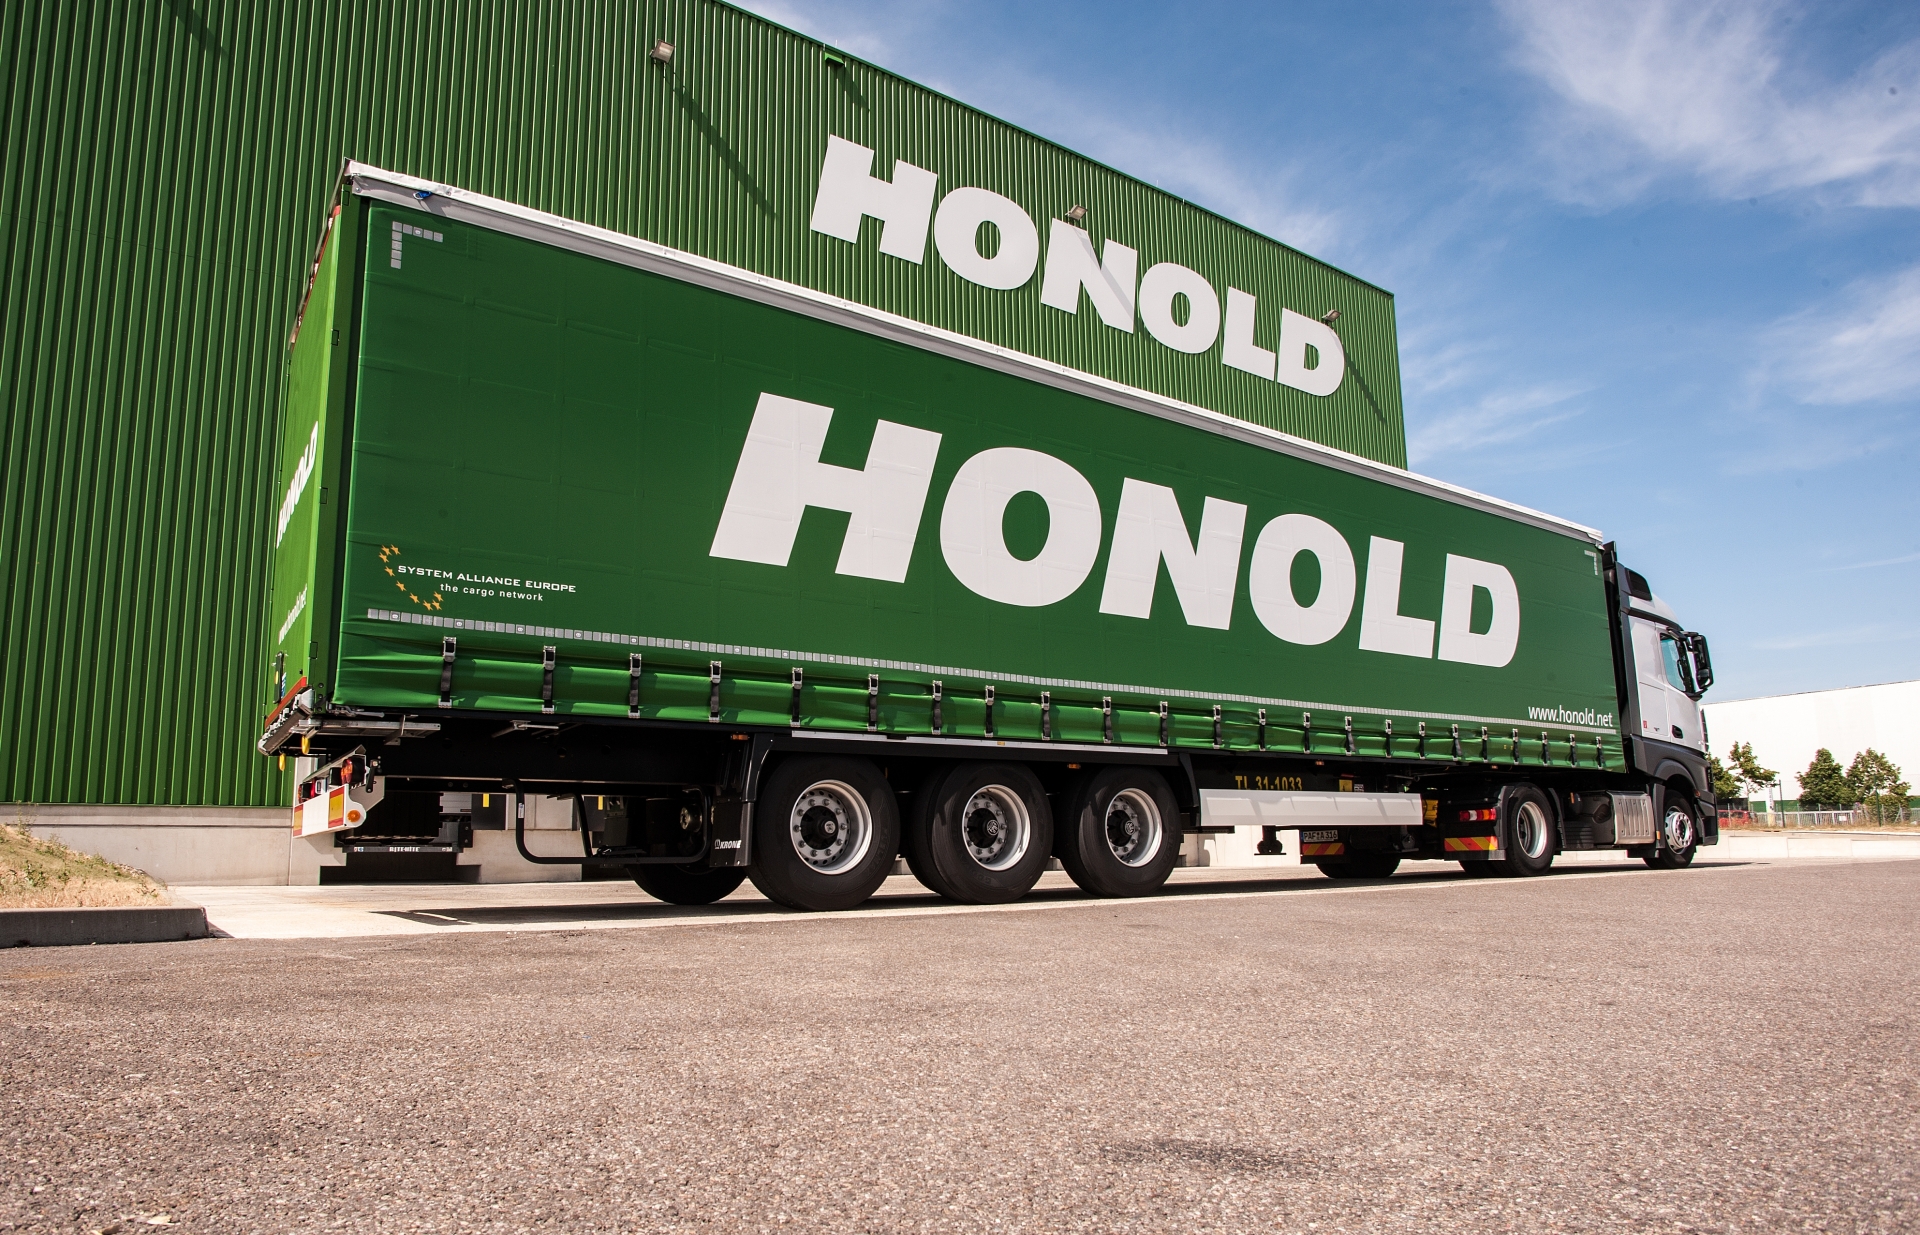 Honold Logistik is expanding using a sustainable business idea